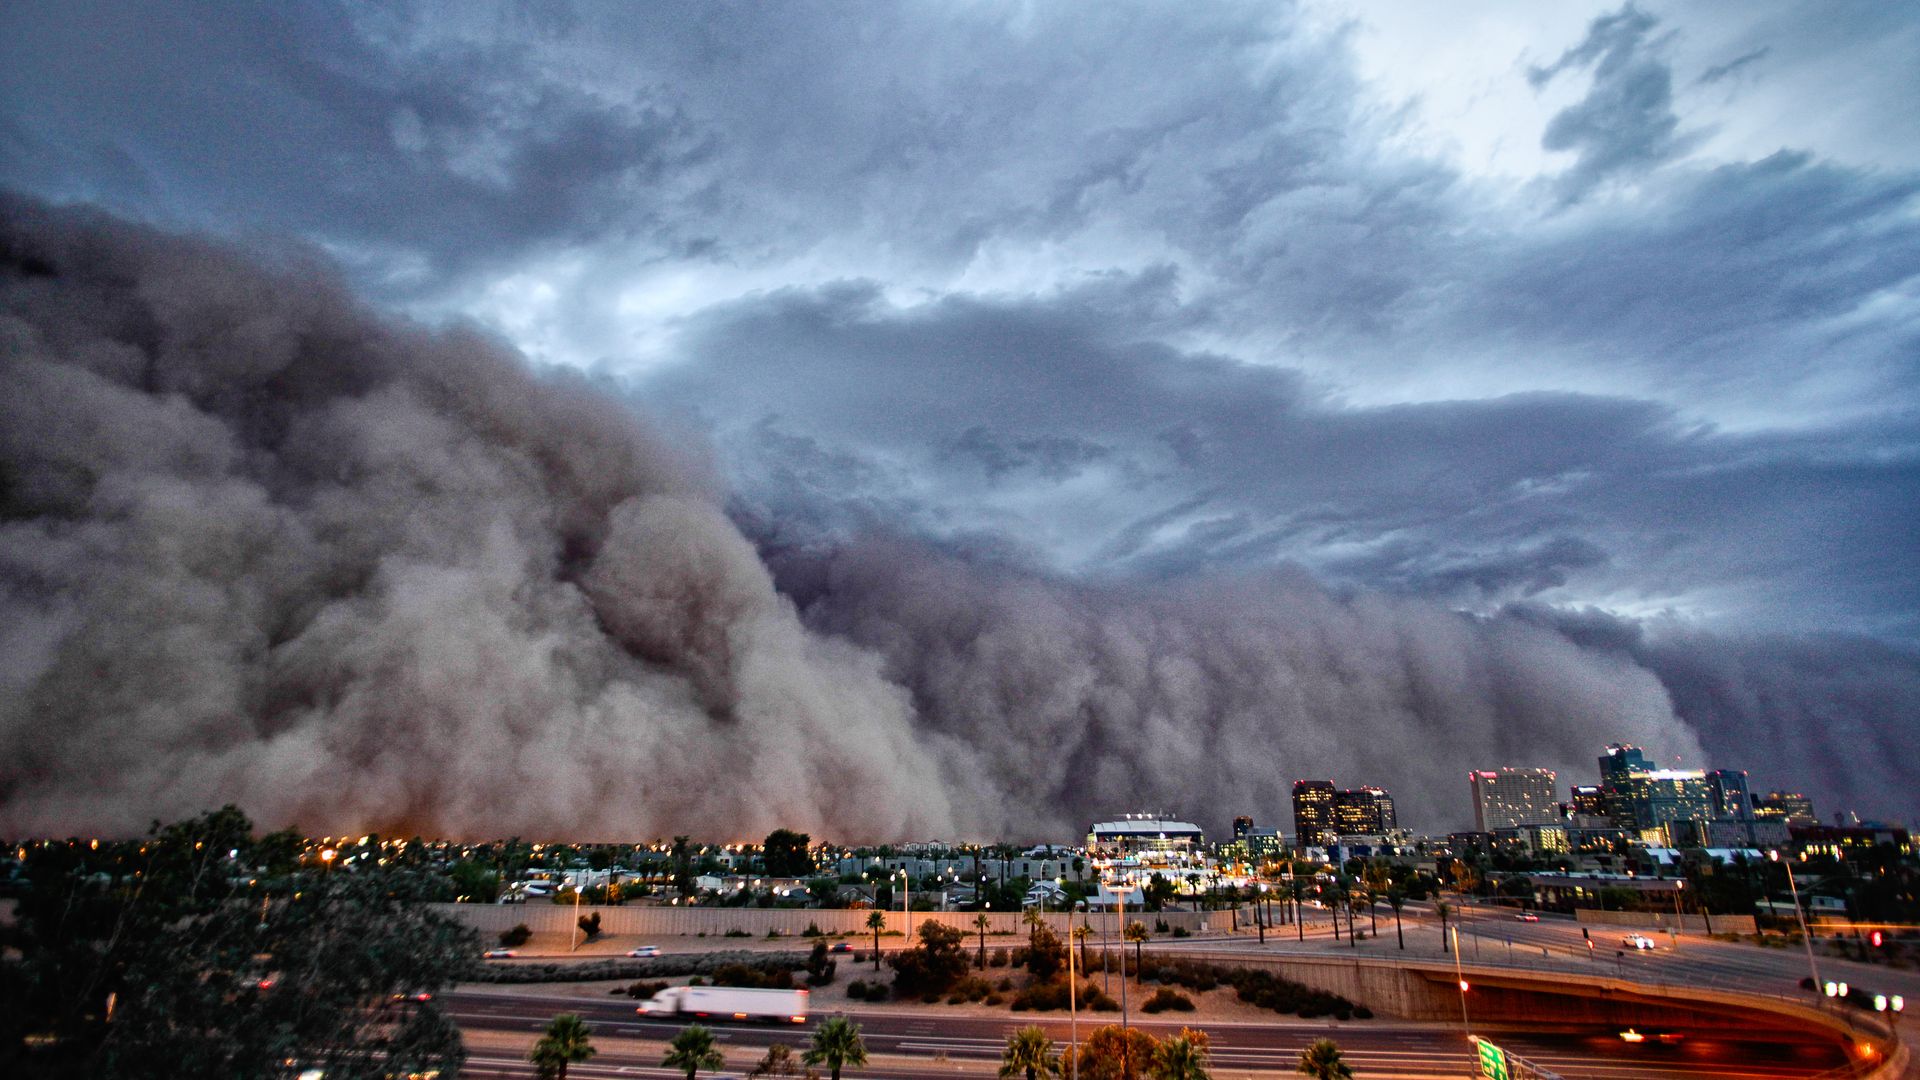 A huge wall of dust envelops a city during a storm. 